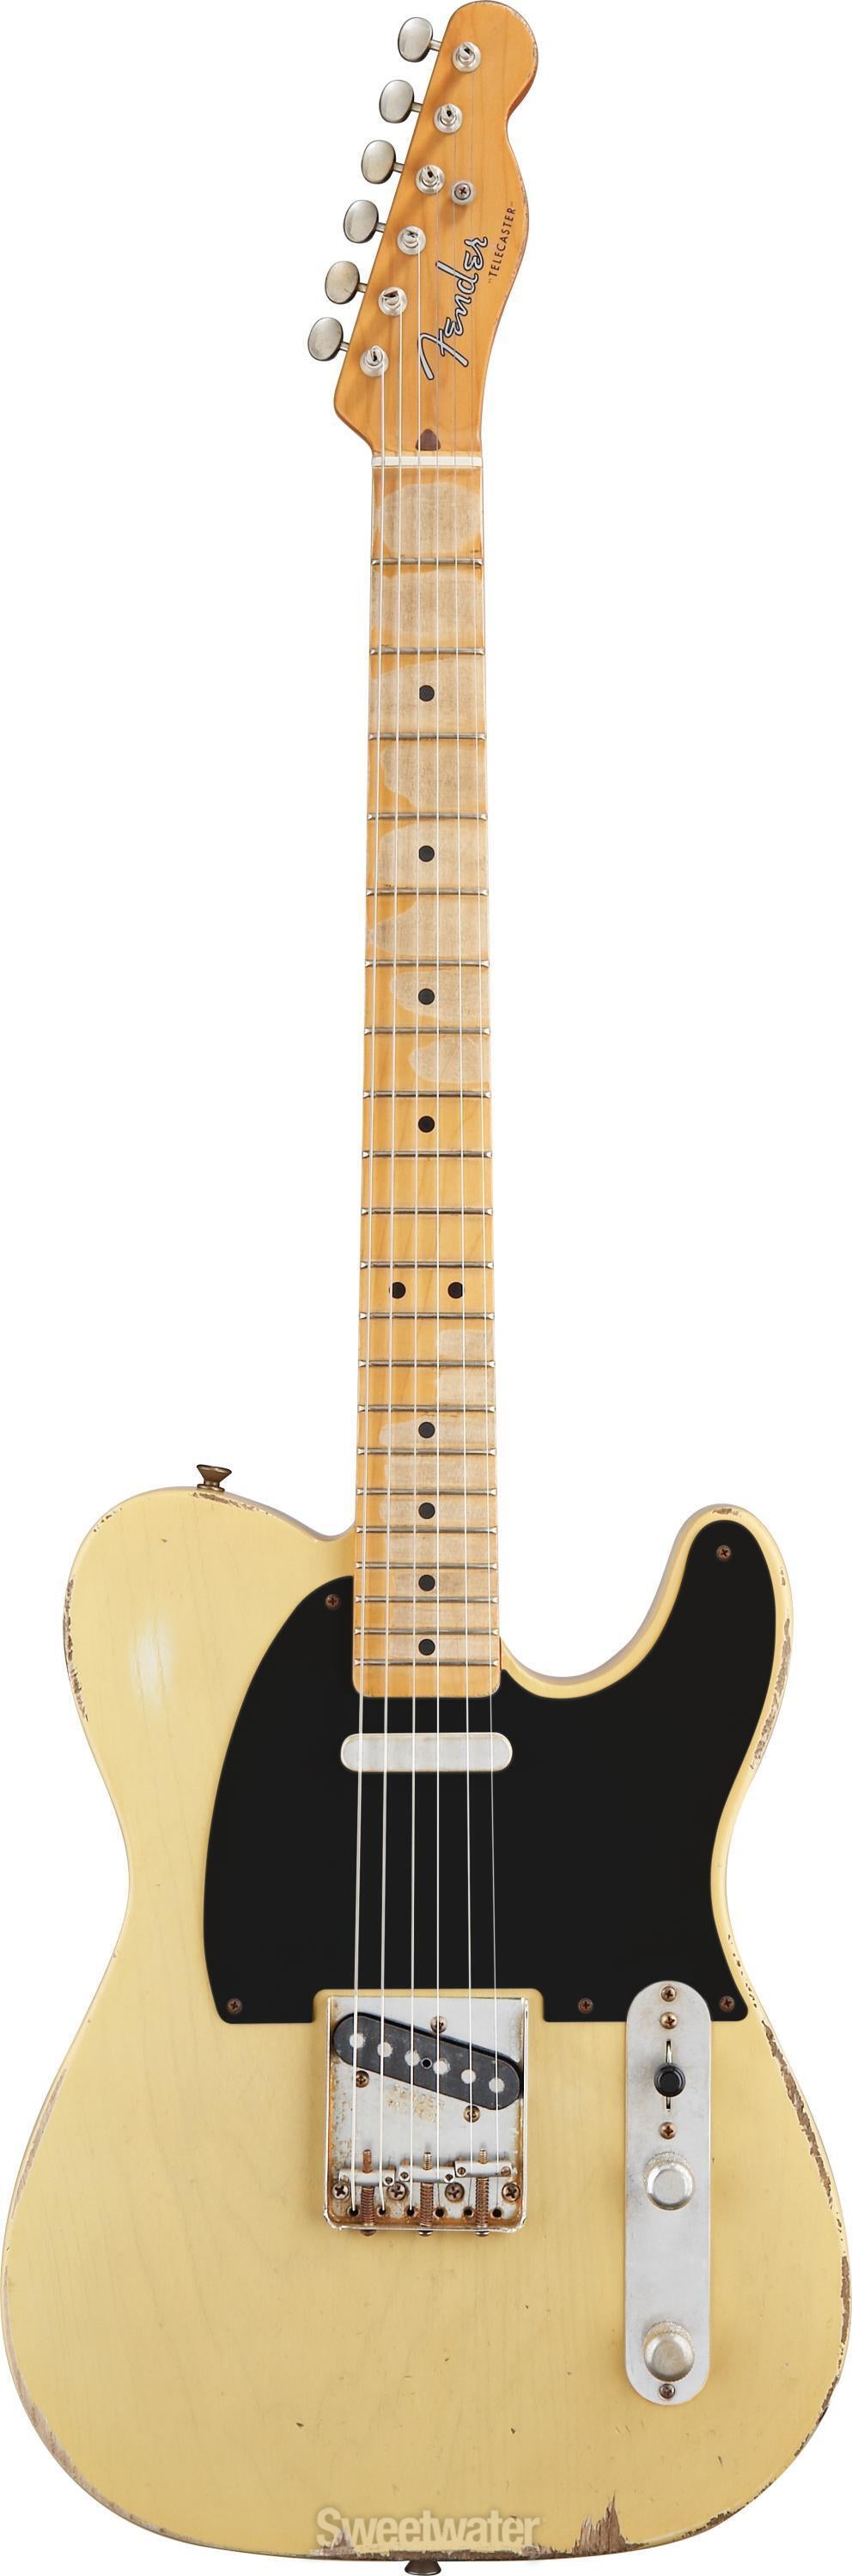 Fender Road Worn '50s Telecaster - Blonde with Maple Fingerboard 